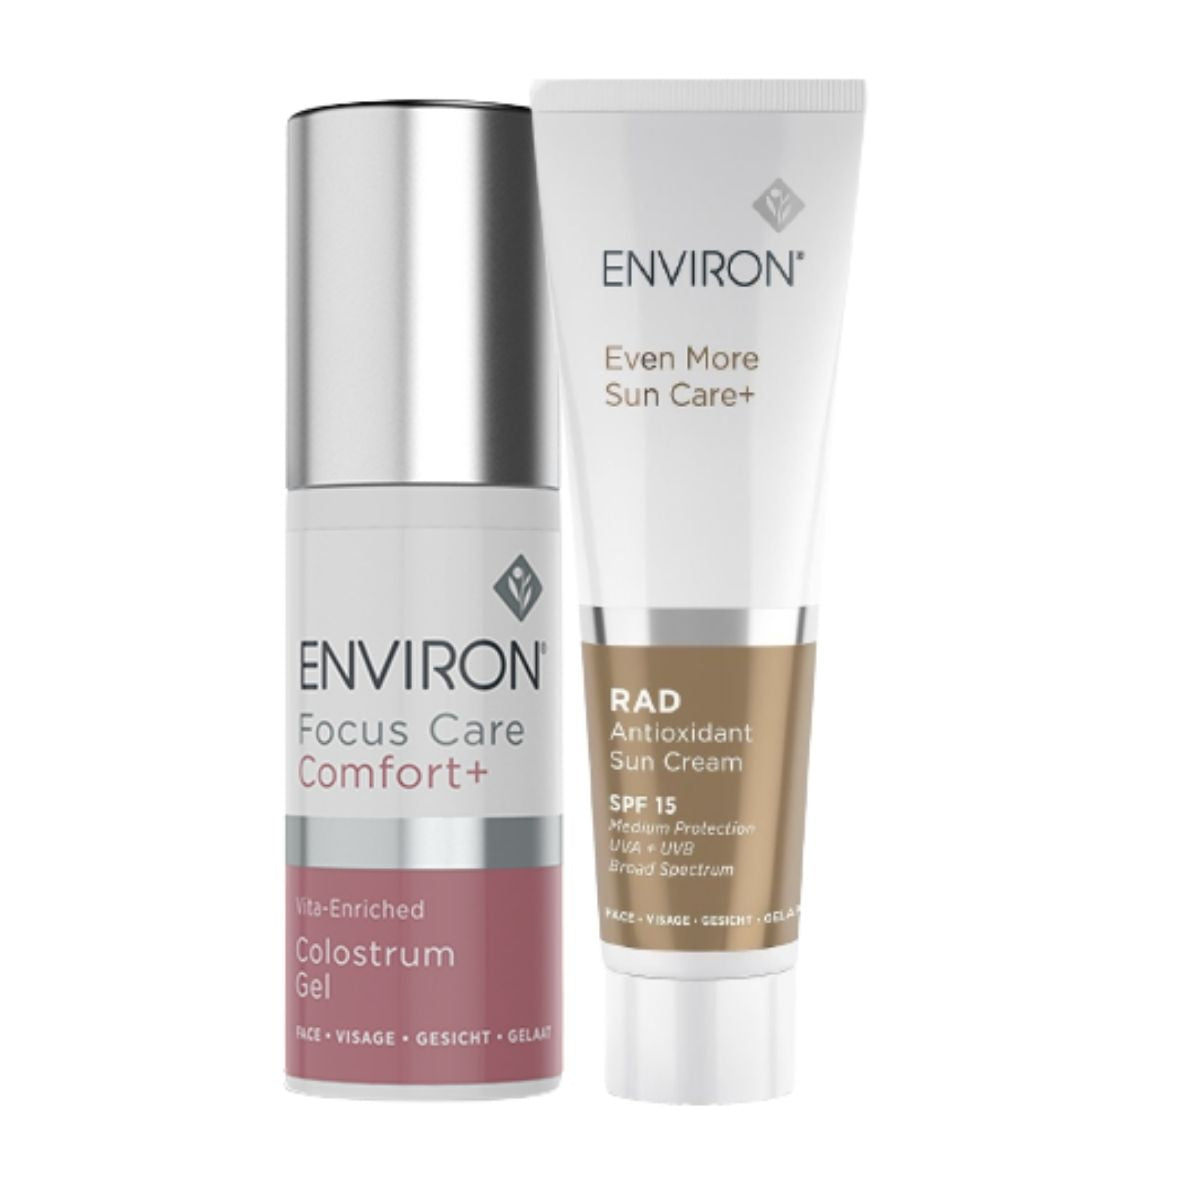 Environ Calm and Protect Duo Bundle